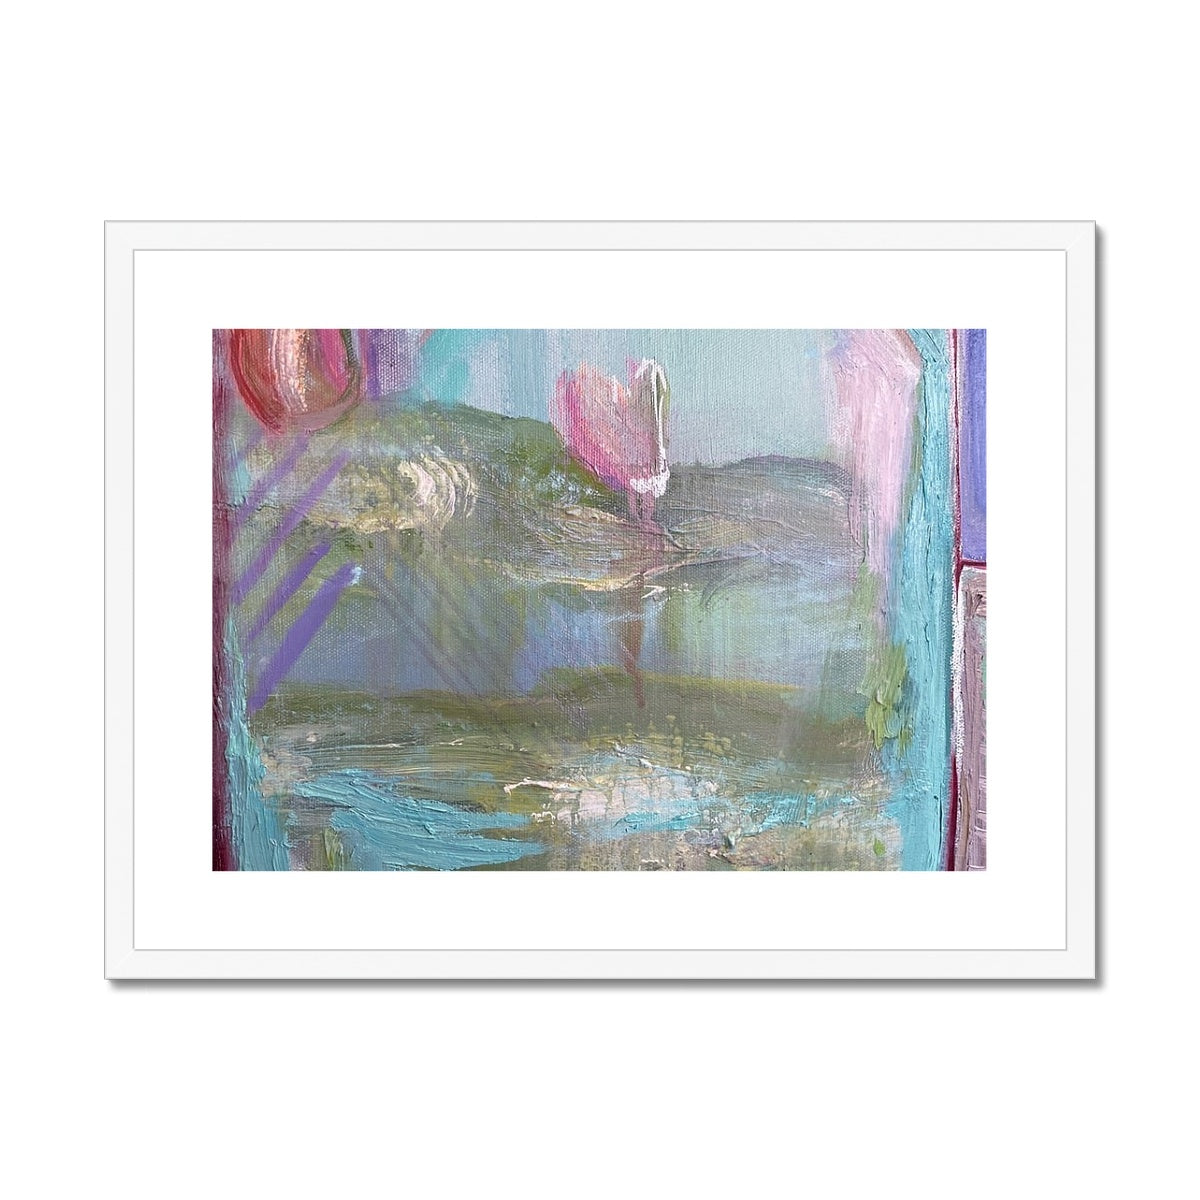 Water Lilly Framed & Mounted Print